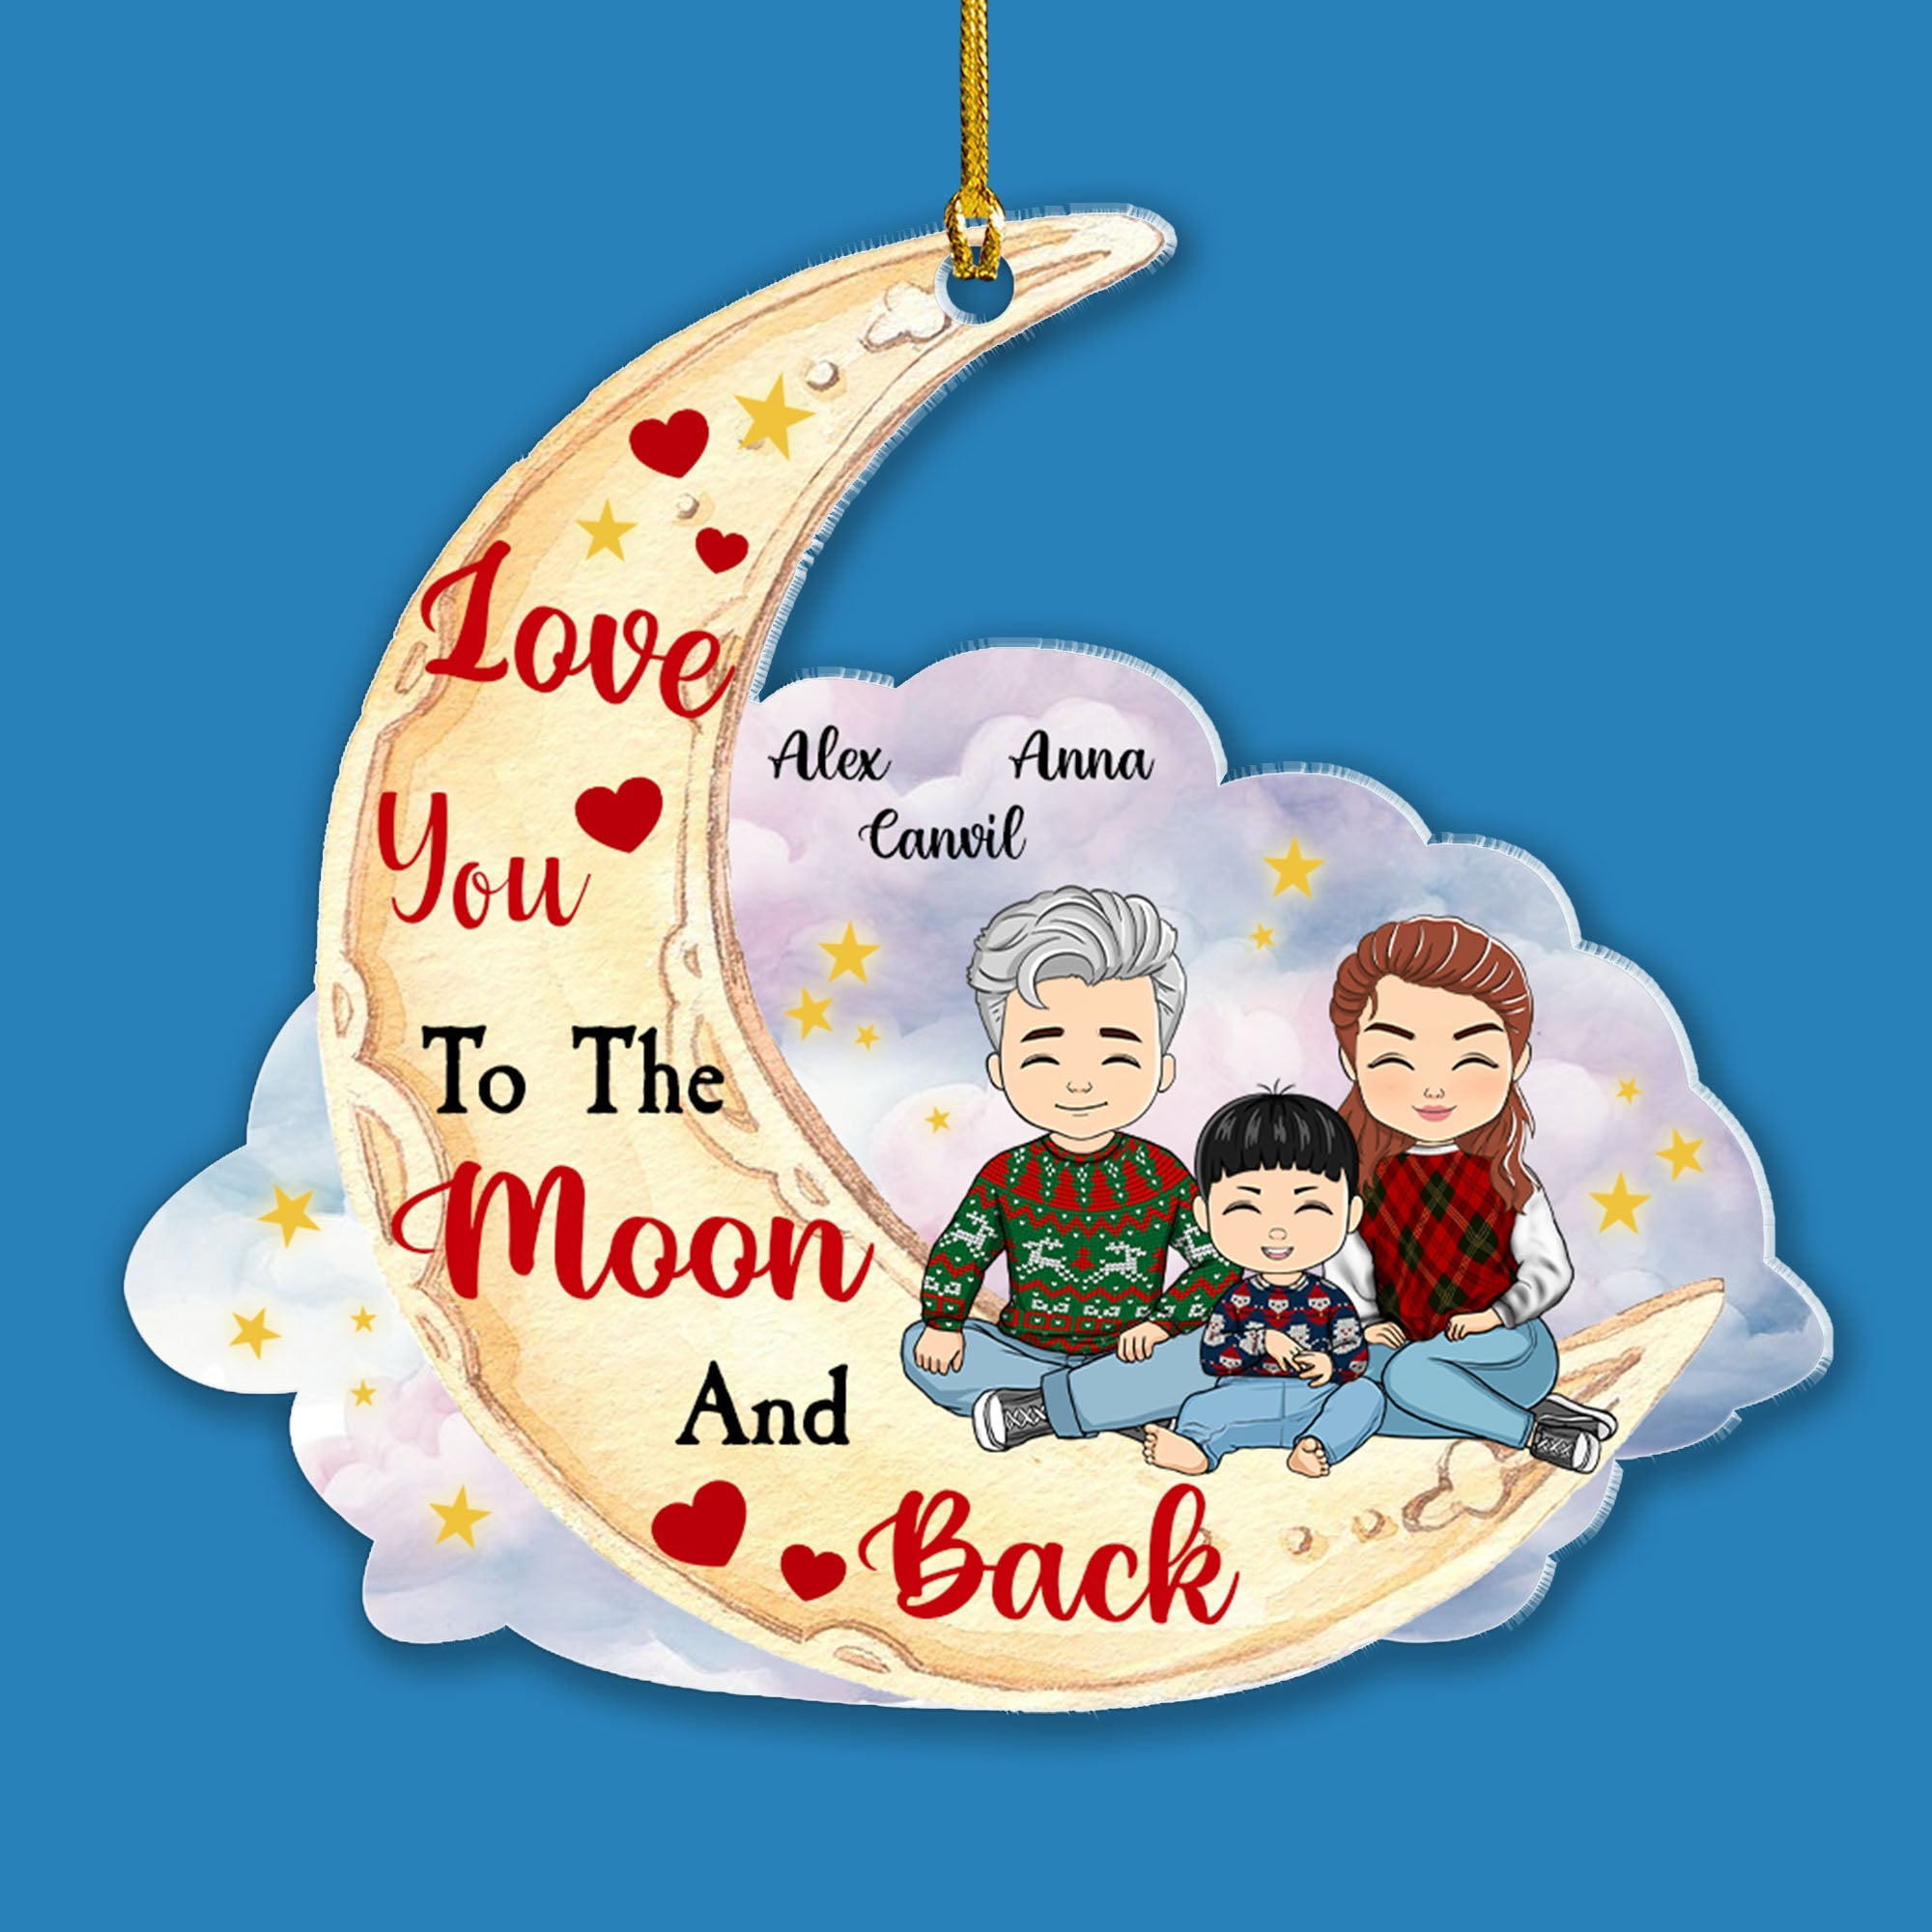 Love You To The Moon And Back - Personalized Custom Shape Acrylic Ornament